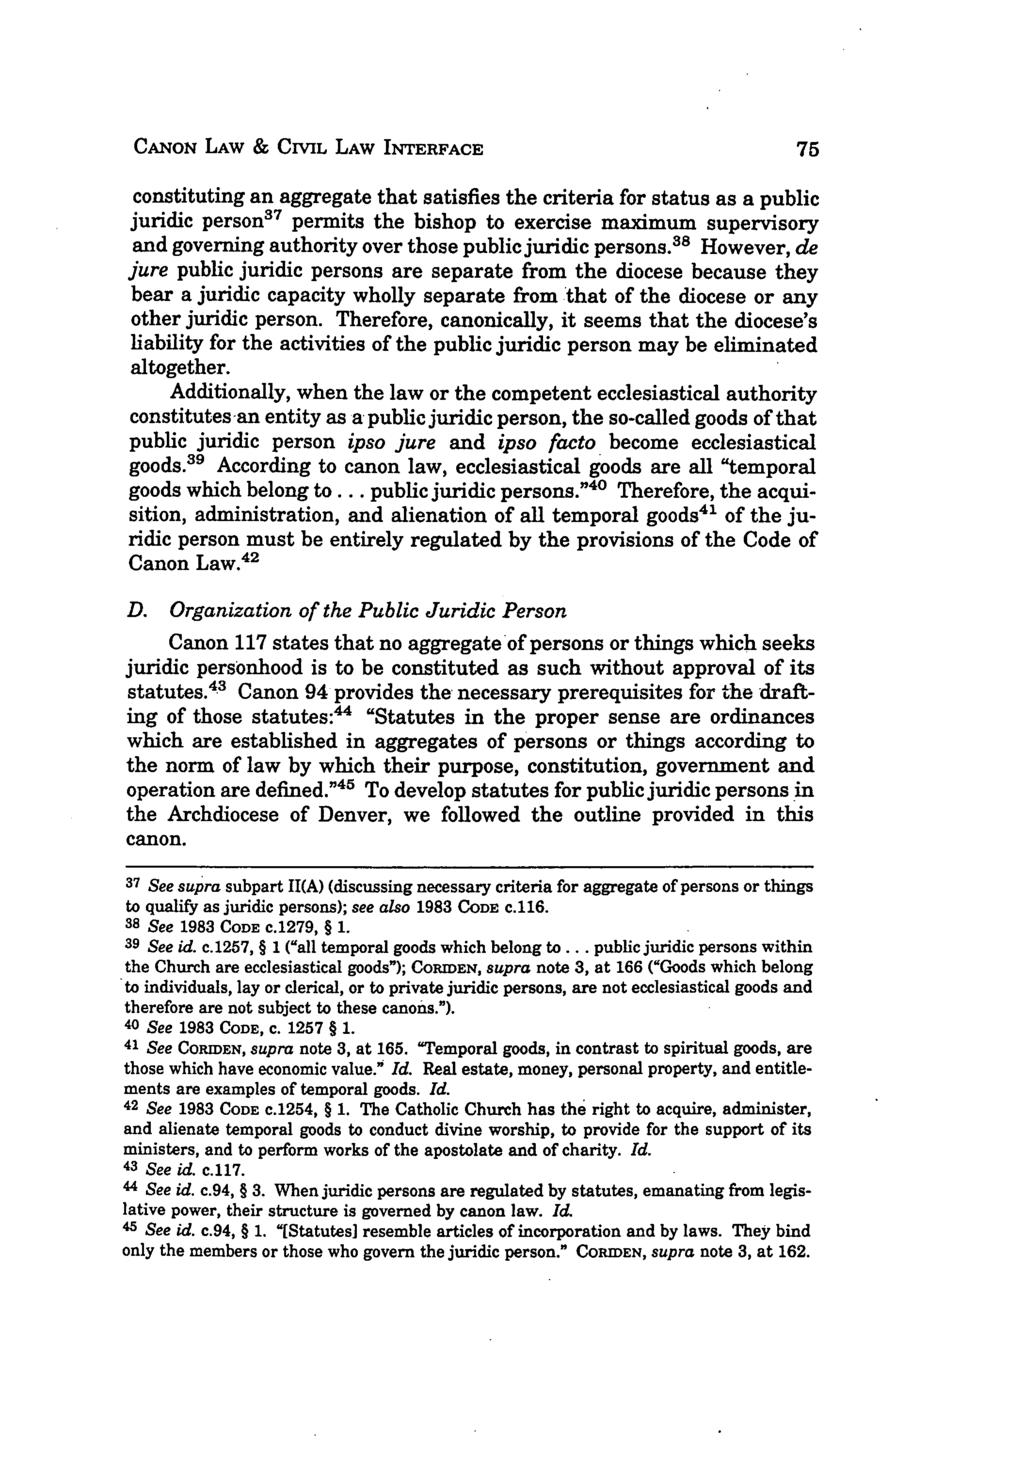 CANON LAW & CIVIL LAW INTERFACE constituting an aggregate that satisfies the criteria for status as a public juridic person 7 permits the bishop to exercise maximum supervisory and governing